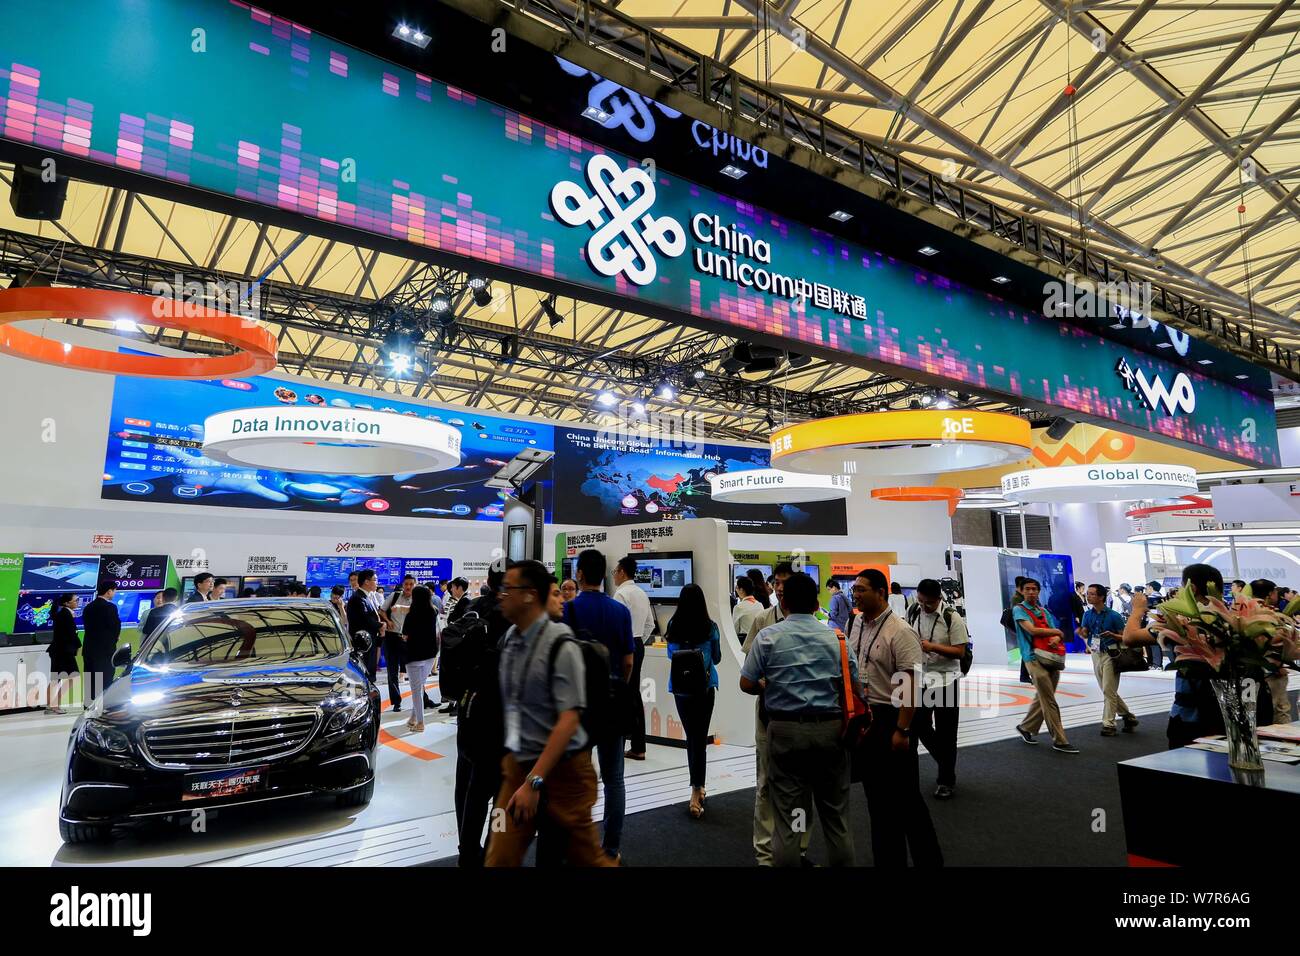 People visit the stand of China Unicom during the 2017 Mobile World Congress (MWC) in Shanghai, China, 28 June 2017.   The Mobile World Congress 2017 Stock Photo